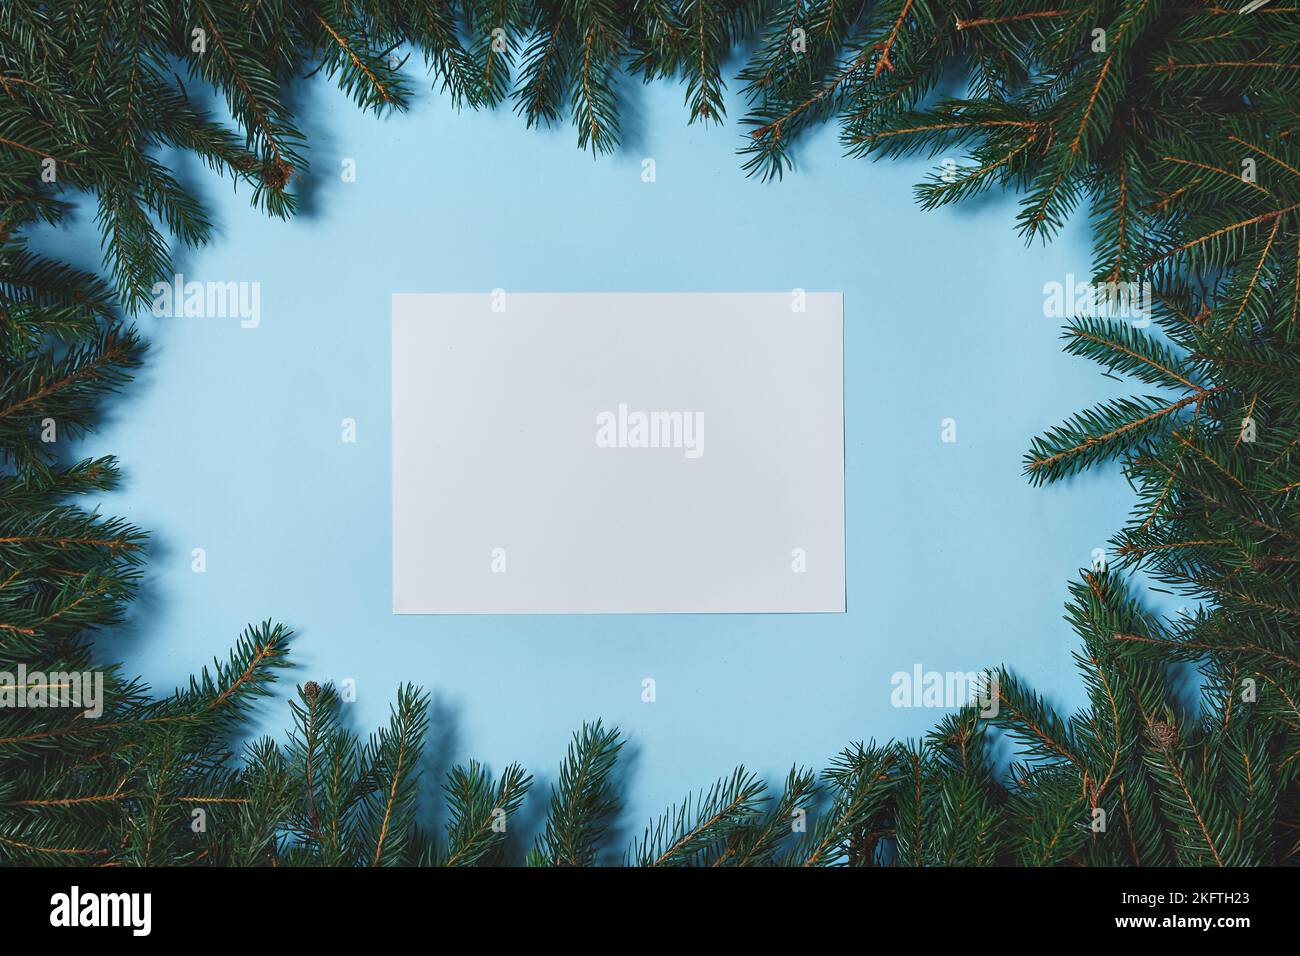 Layout made of Christmas tree branches with paper card note on blue background. Flat lay. Nature New Year concept. Stock Photo